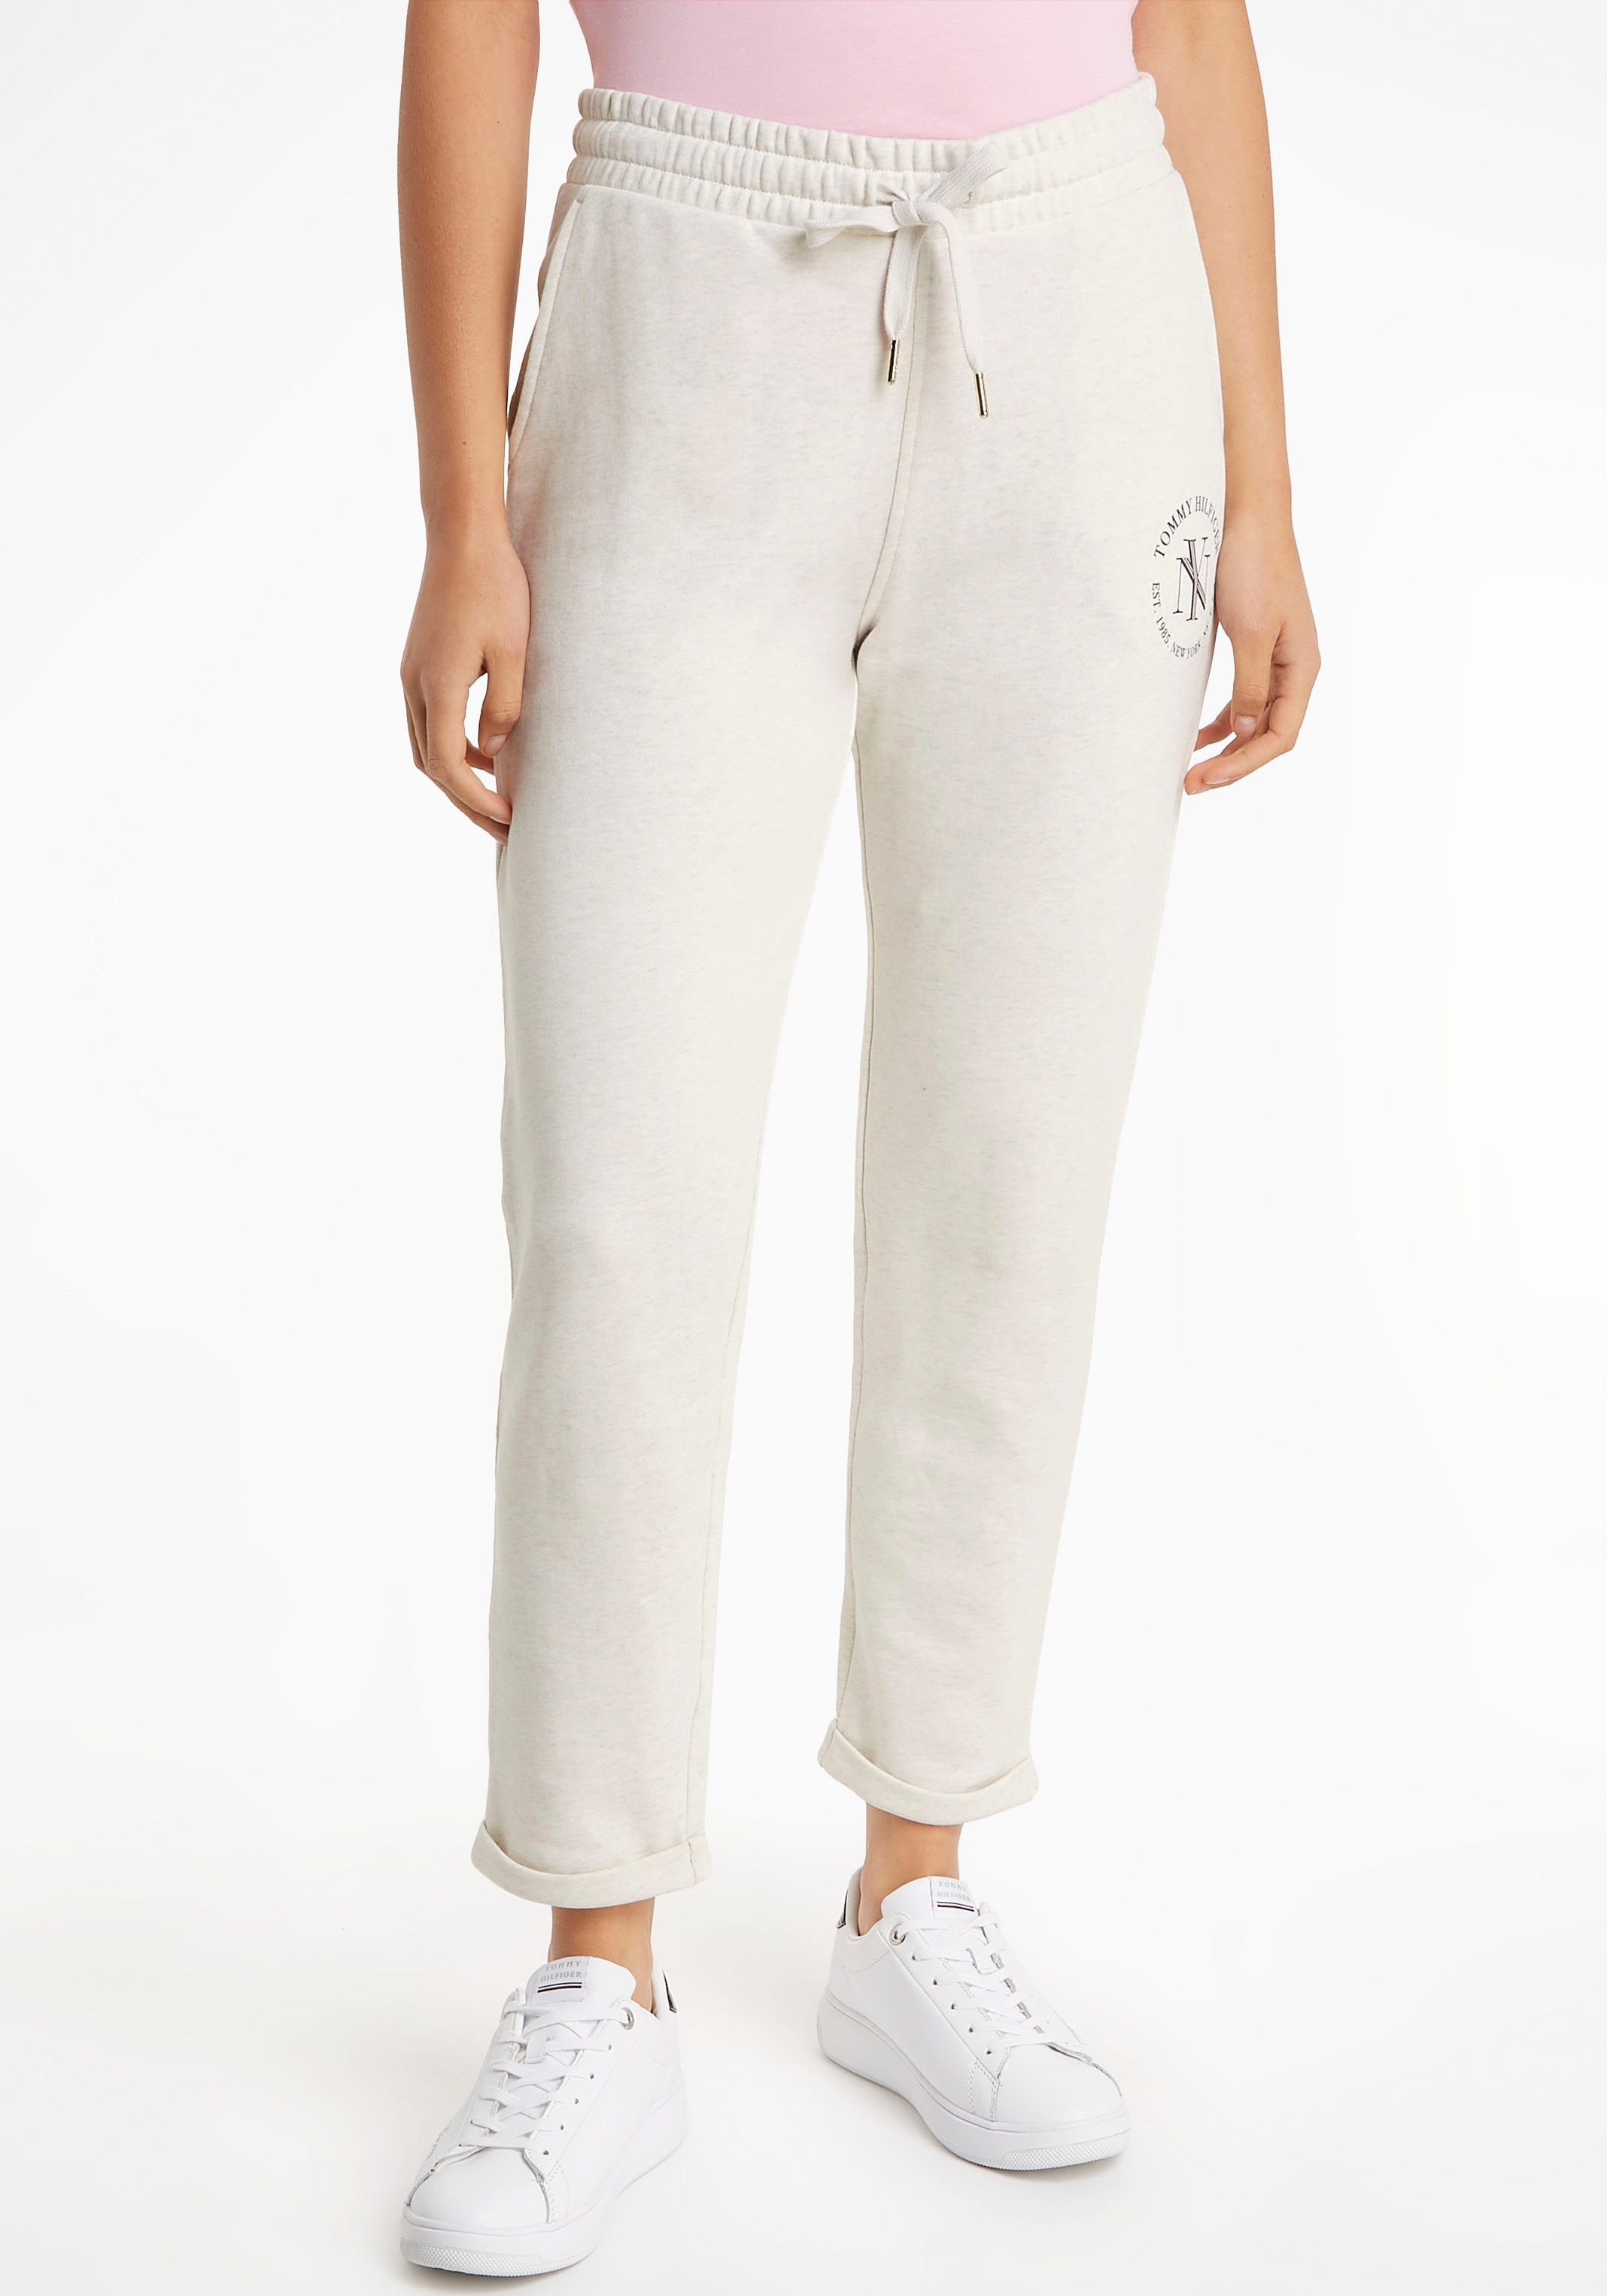 Tommy Hilfiger NYC Hilfiger ♕ Sweatpants bei SWEATPANTS«, ROUNDALL Tommy Markenlabel »TAPERED mit